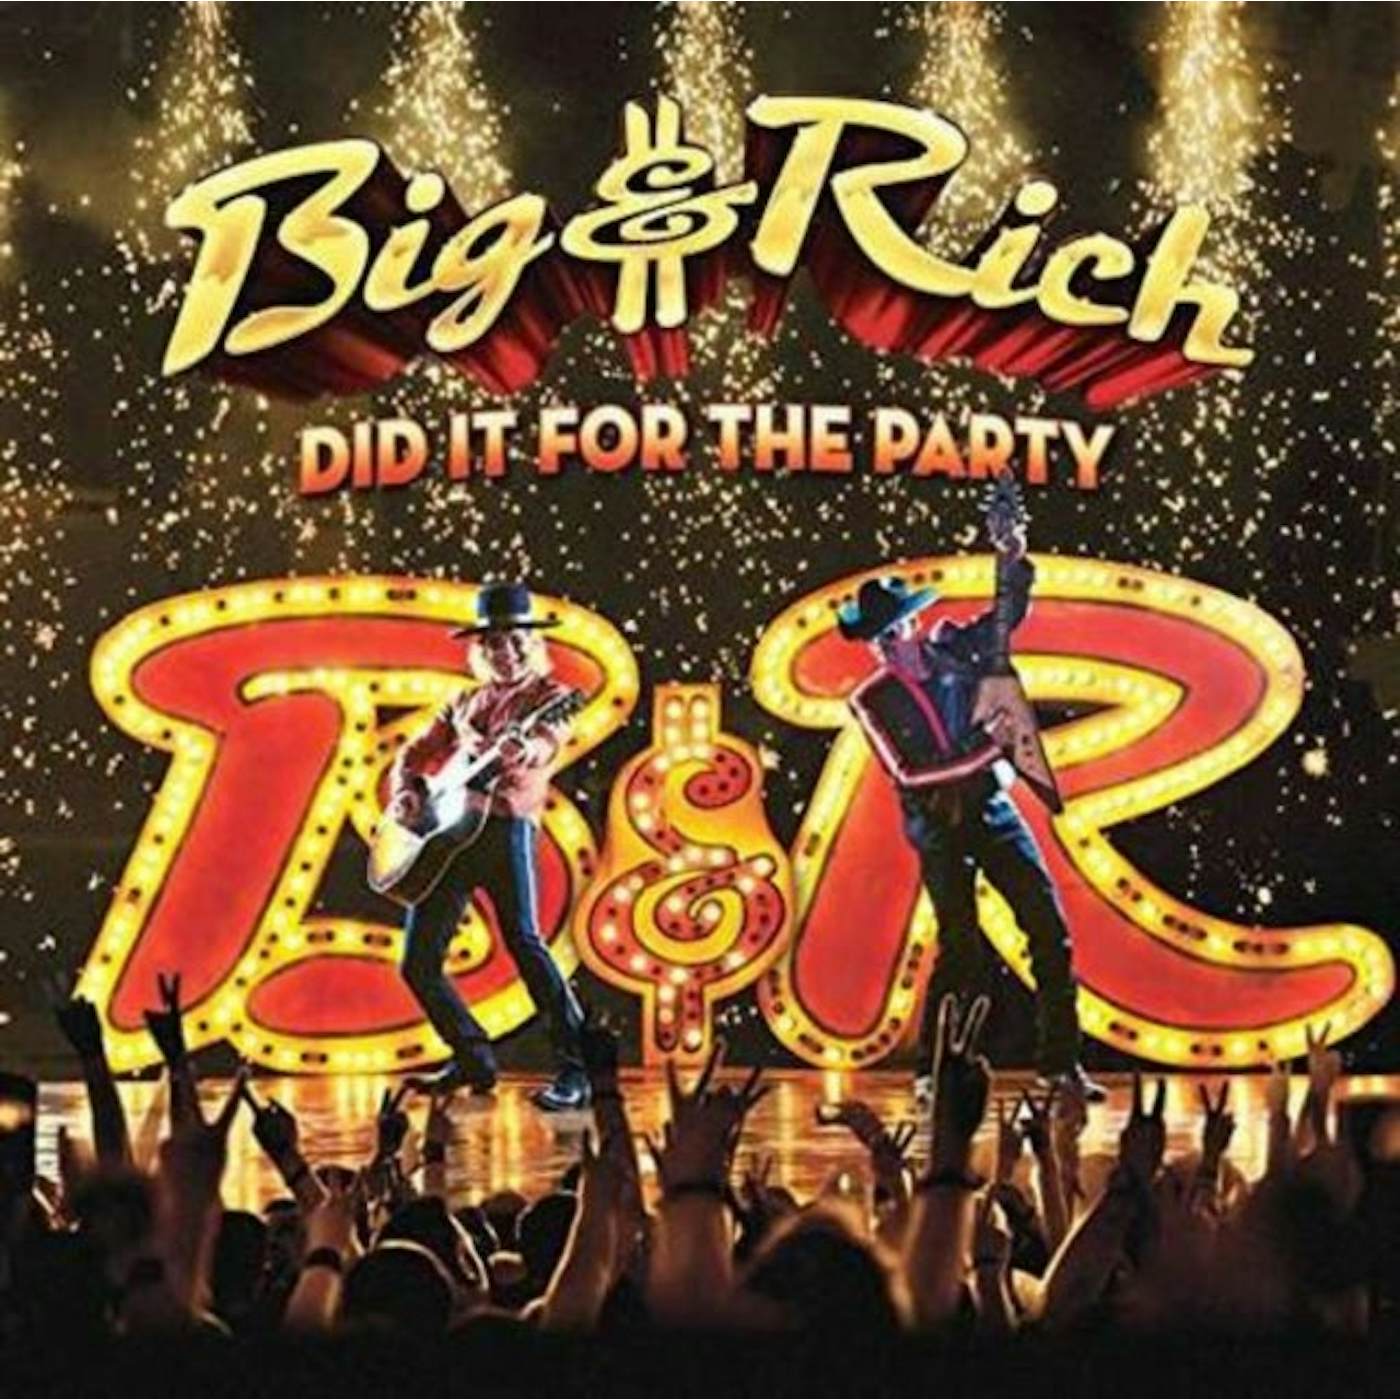 Big & Rich CD - Did It For The Party